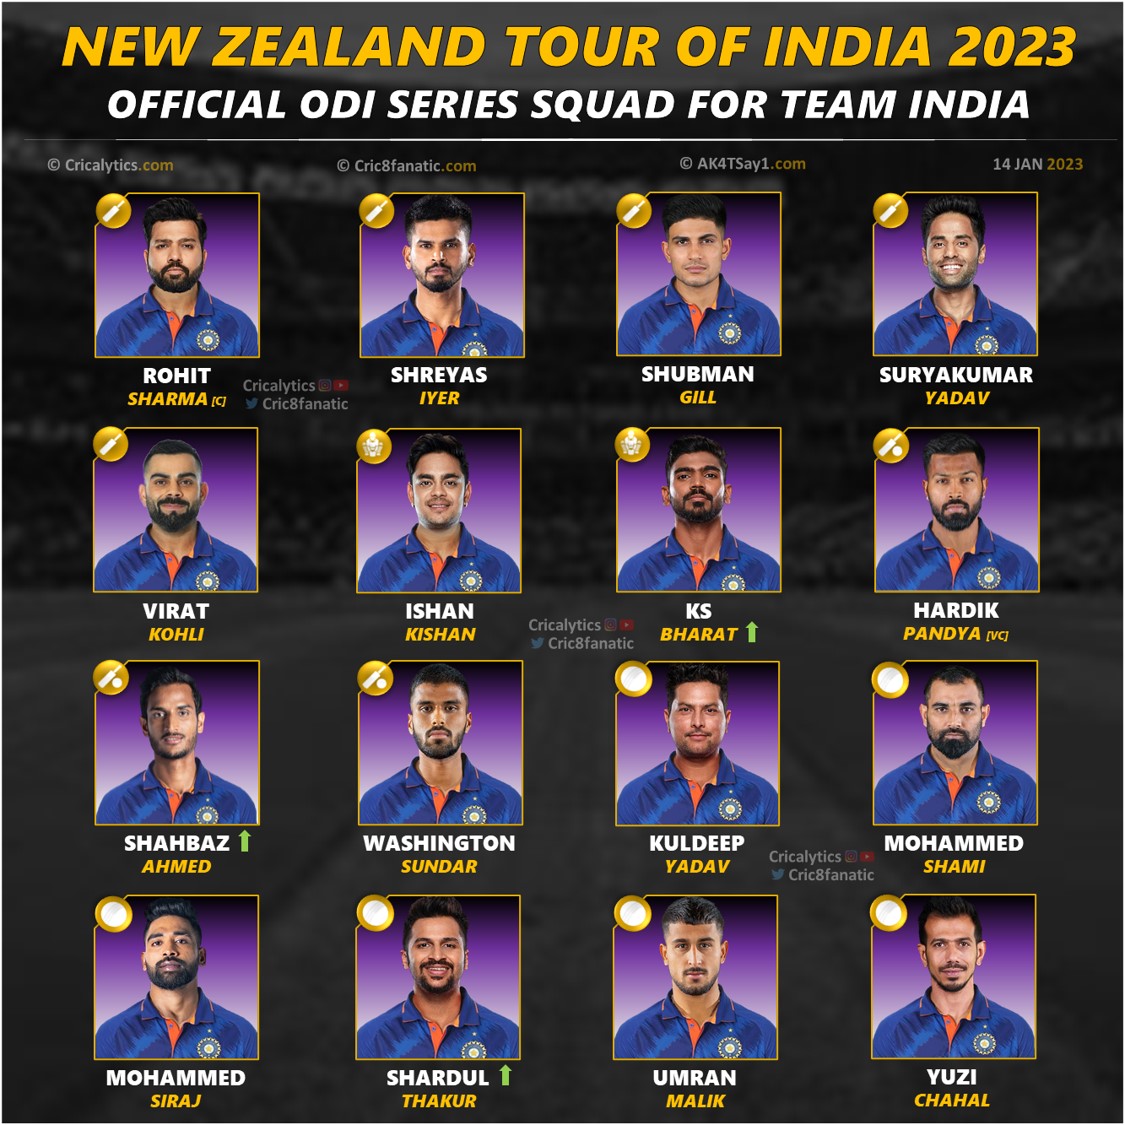 india vs new zealand 2023 official odi series squad and players list